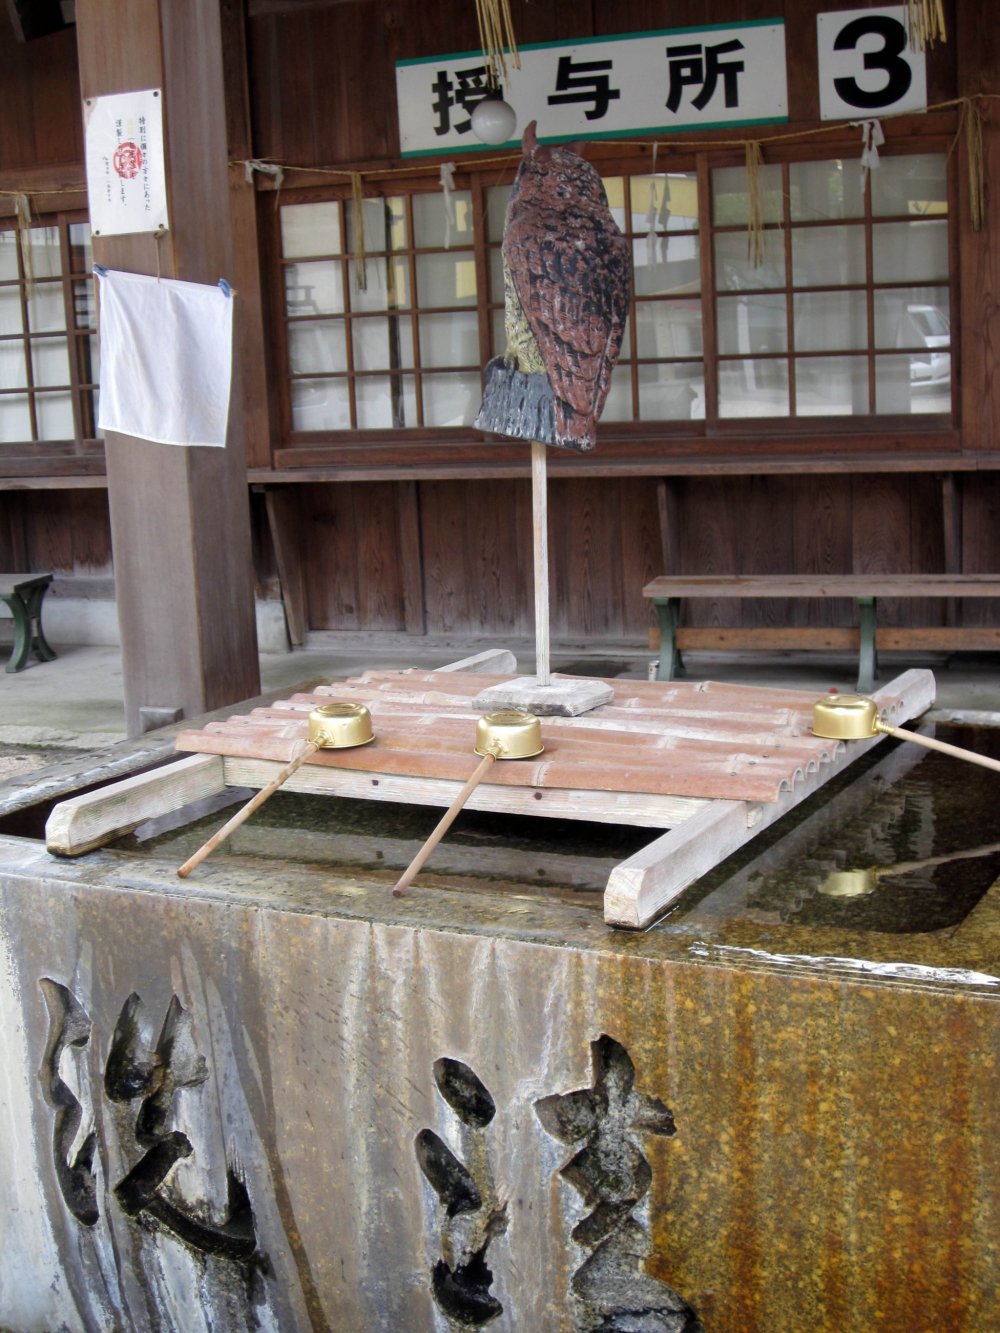 Be sure to wash your hands before entering the shrine area of Tsukimi Tei.